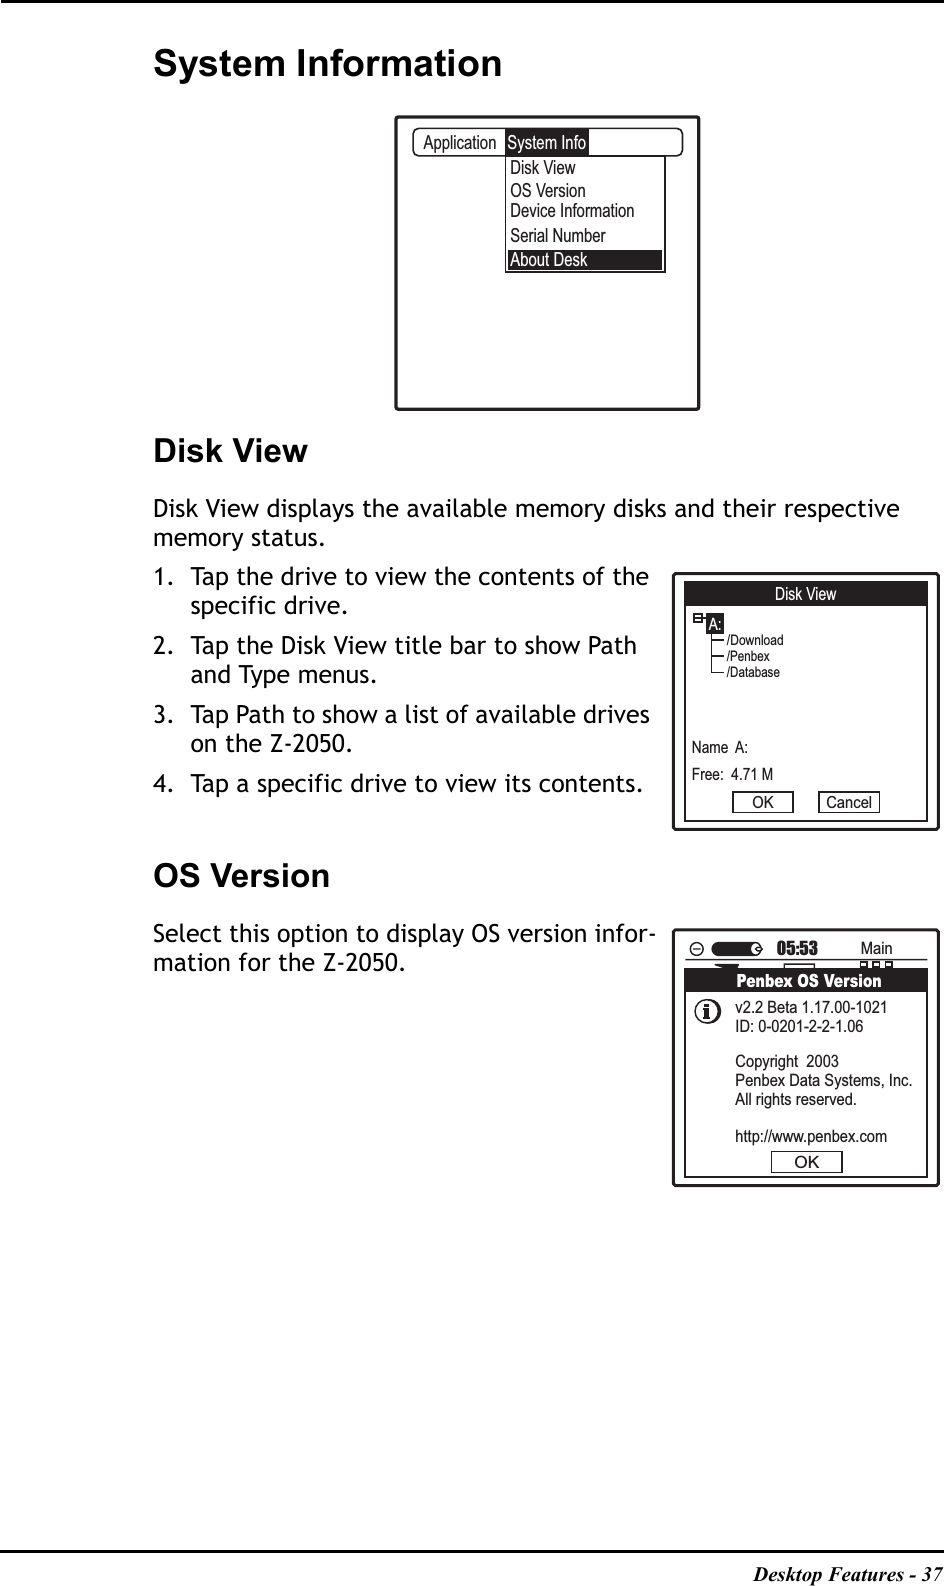 Desktop Features - 37System InformationDisk ViewDisk View displays the available memory disks and their respective memory status.1. Tap the drive to view the contents of the specific drive.2. Tap the Disk View title bar to show Path and Type menus. 3. Tap Path to show a list of available drives on the Z-2050. 4. Tap a specific drive to view its contents.OS VersionSelect this option to display OS version infor-mation for the Z-2050.ApplicationDisk ViewAbout DeskOS VersionDevice InformationSerial NumberSystem InfoDisk ViewA:Name  A:Free:  4.71 MOK Cancel/Download/Penbex/DatabaseMainFileMgrConsoleNetworkBackupDemoScanBluetoothIrdaTest05:53Penbex OS VersionOKv2.2 Beta 1.17.00-1021ID: 0-0201-2-2-1.06Copyright  2003Penbex Data Systems, Inc.All rights reserved.http://www.penbex.com